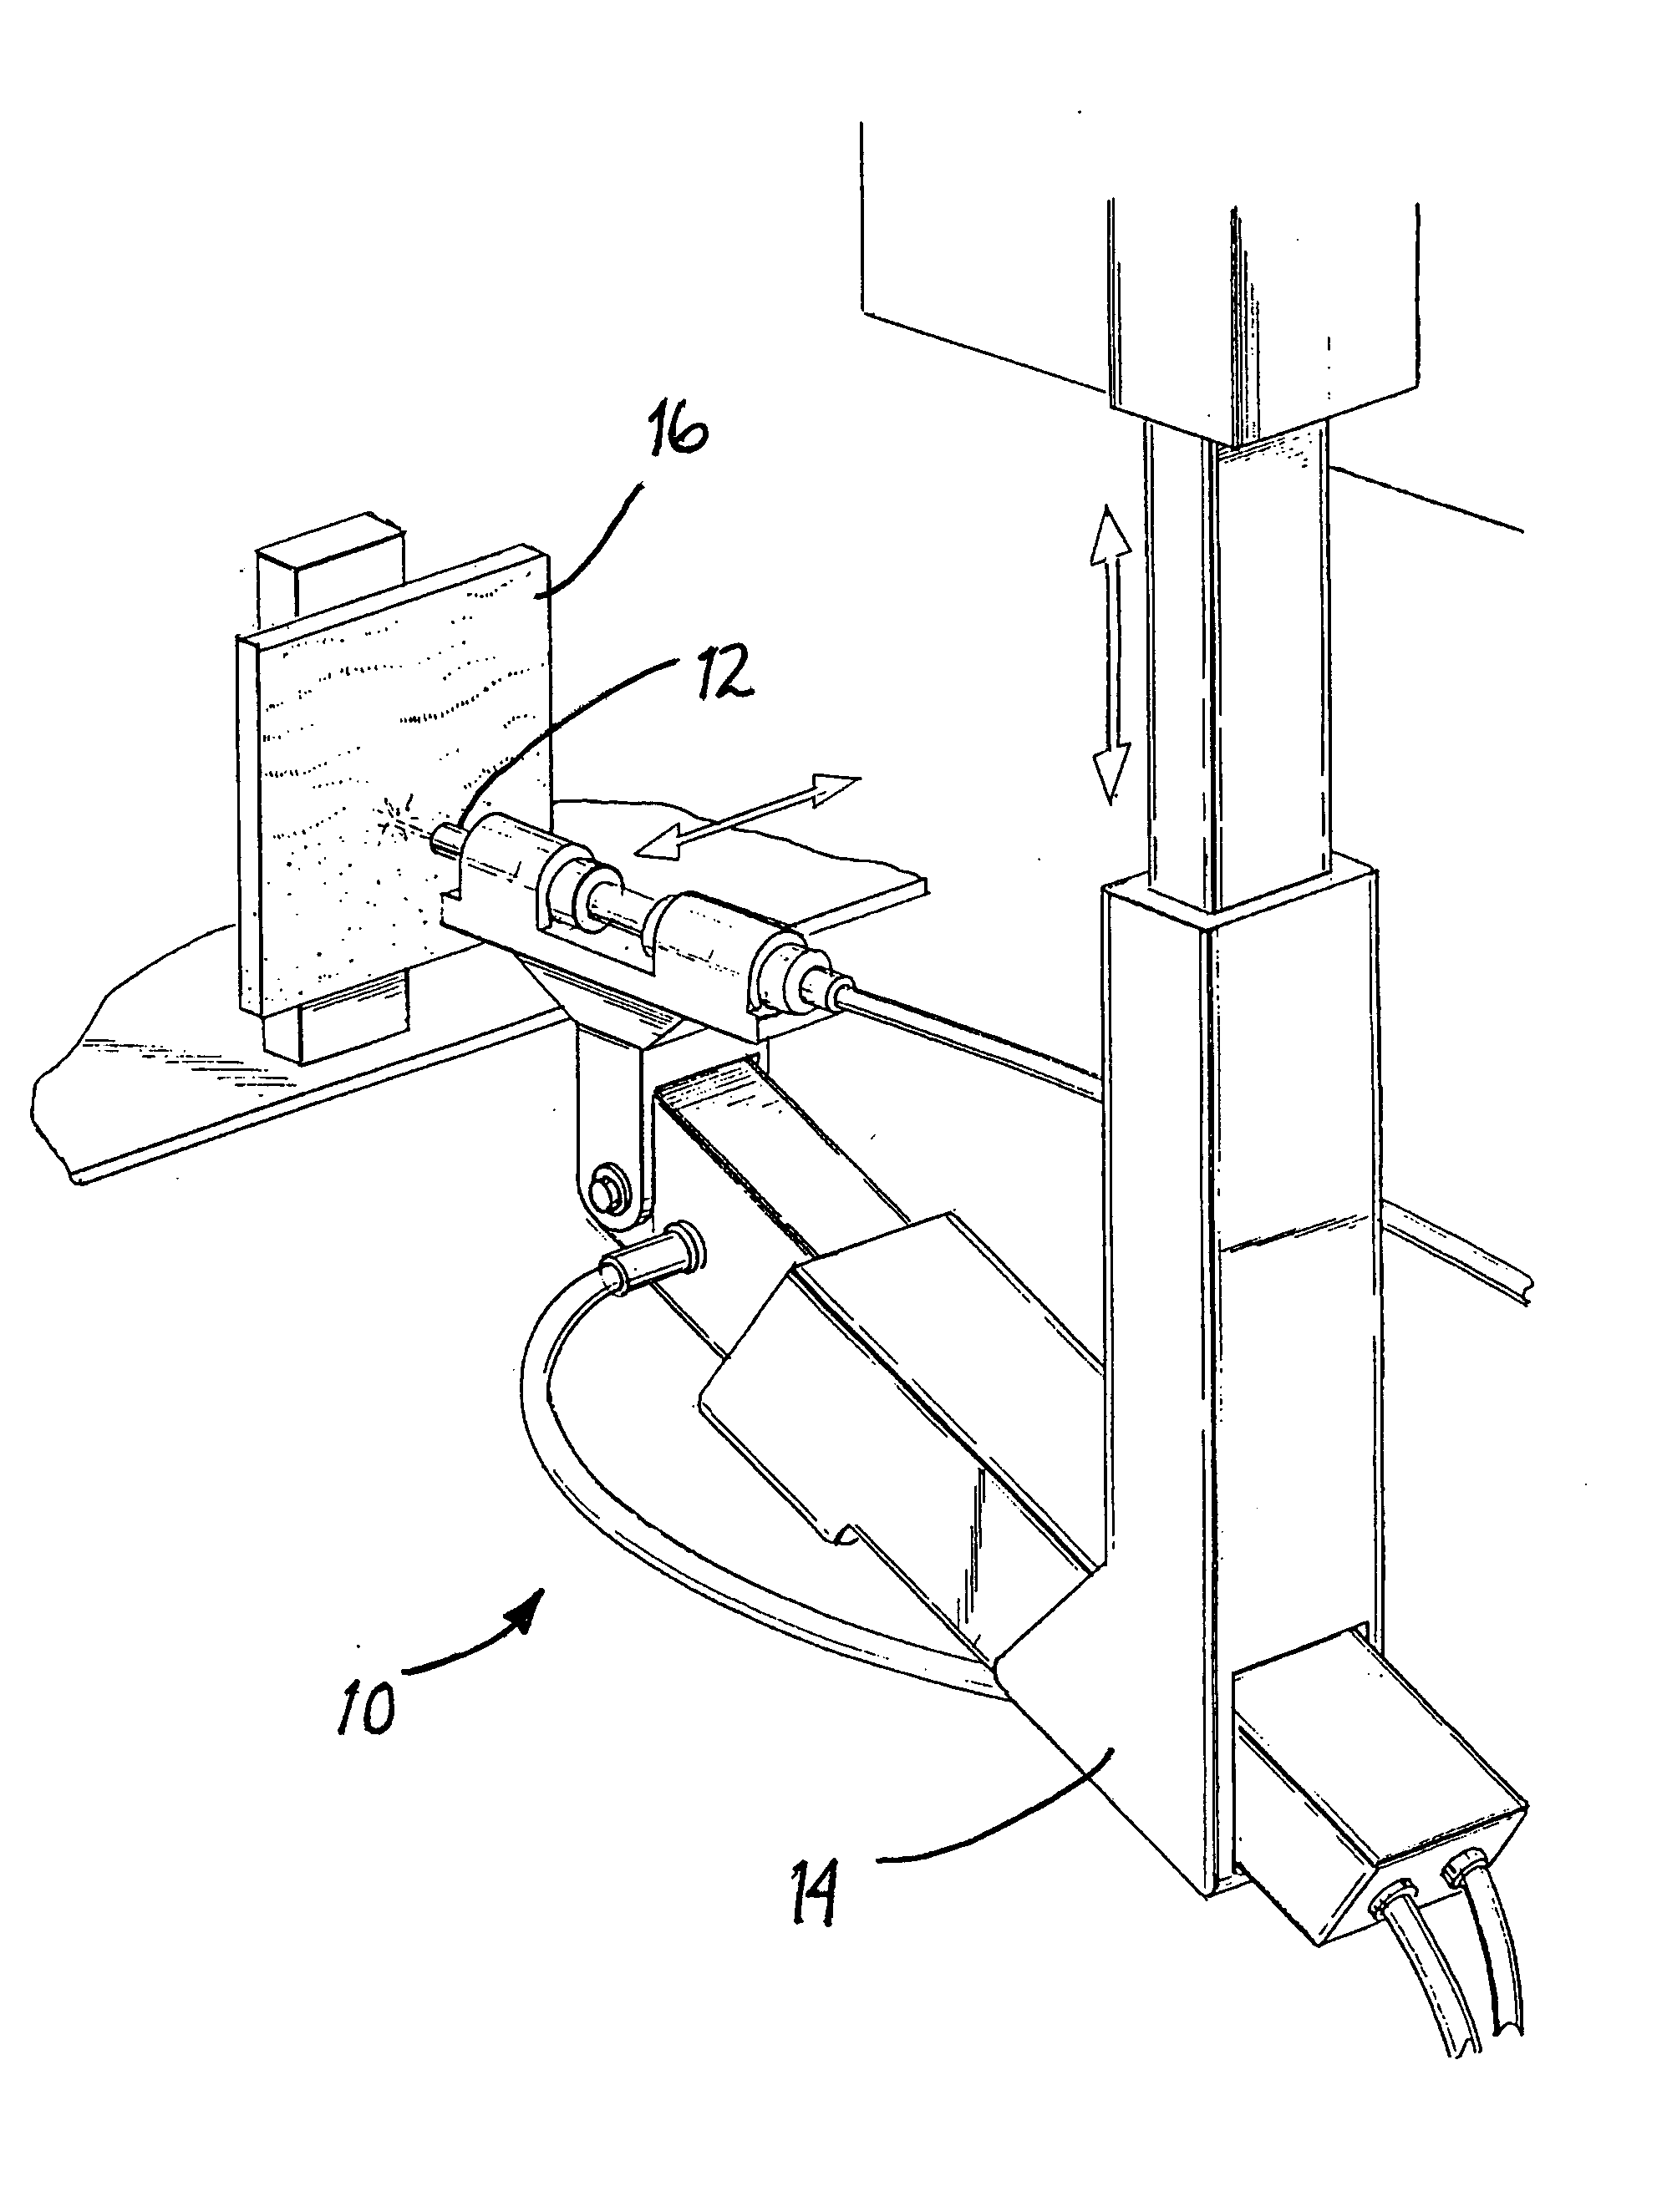 Method for applying metallurgical coatings to gas turbine components